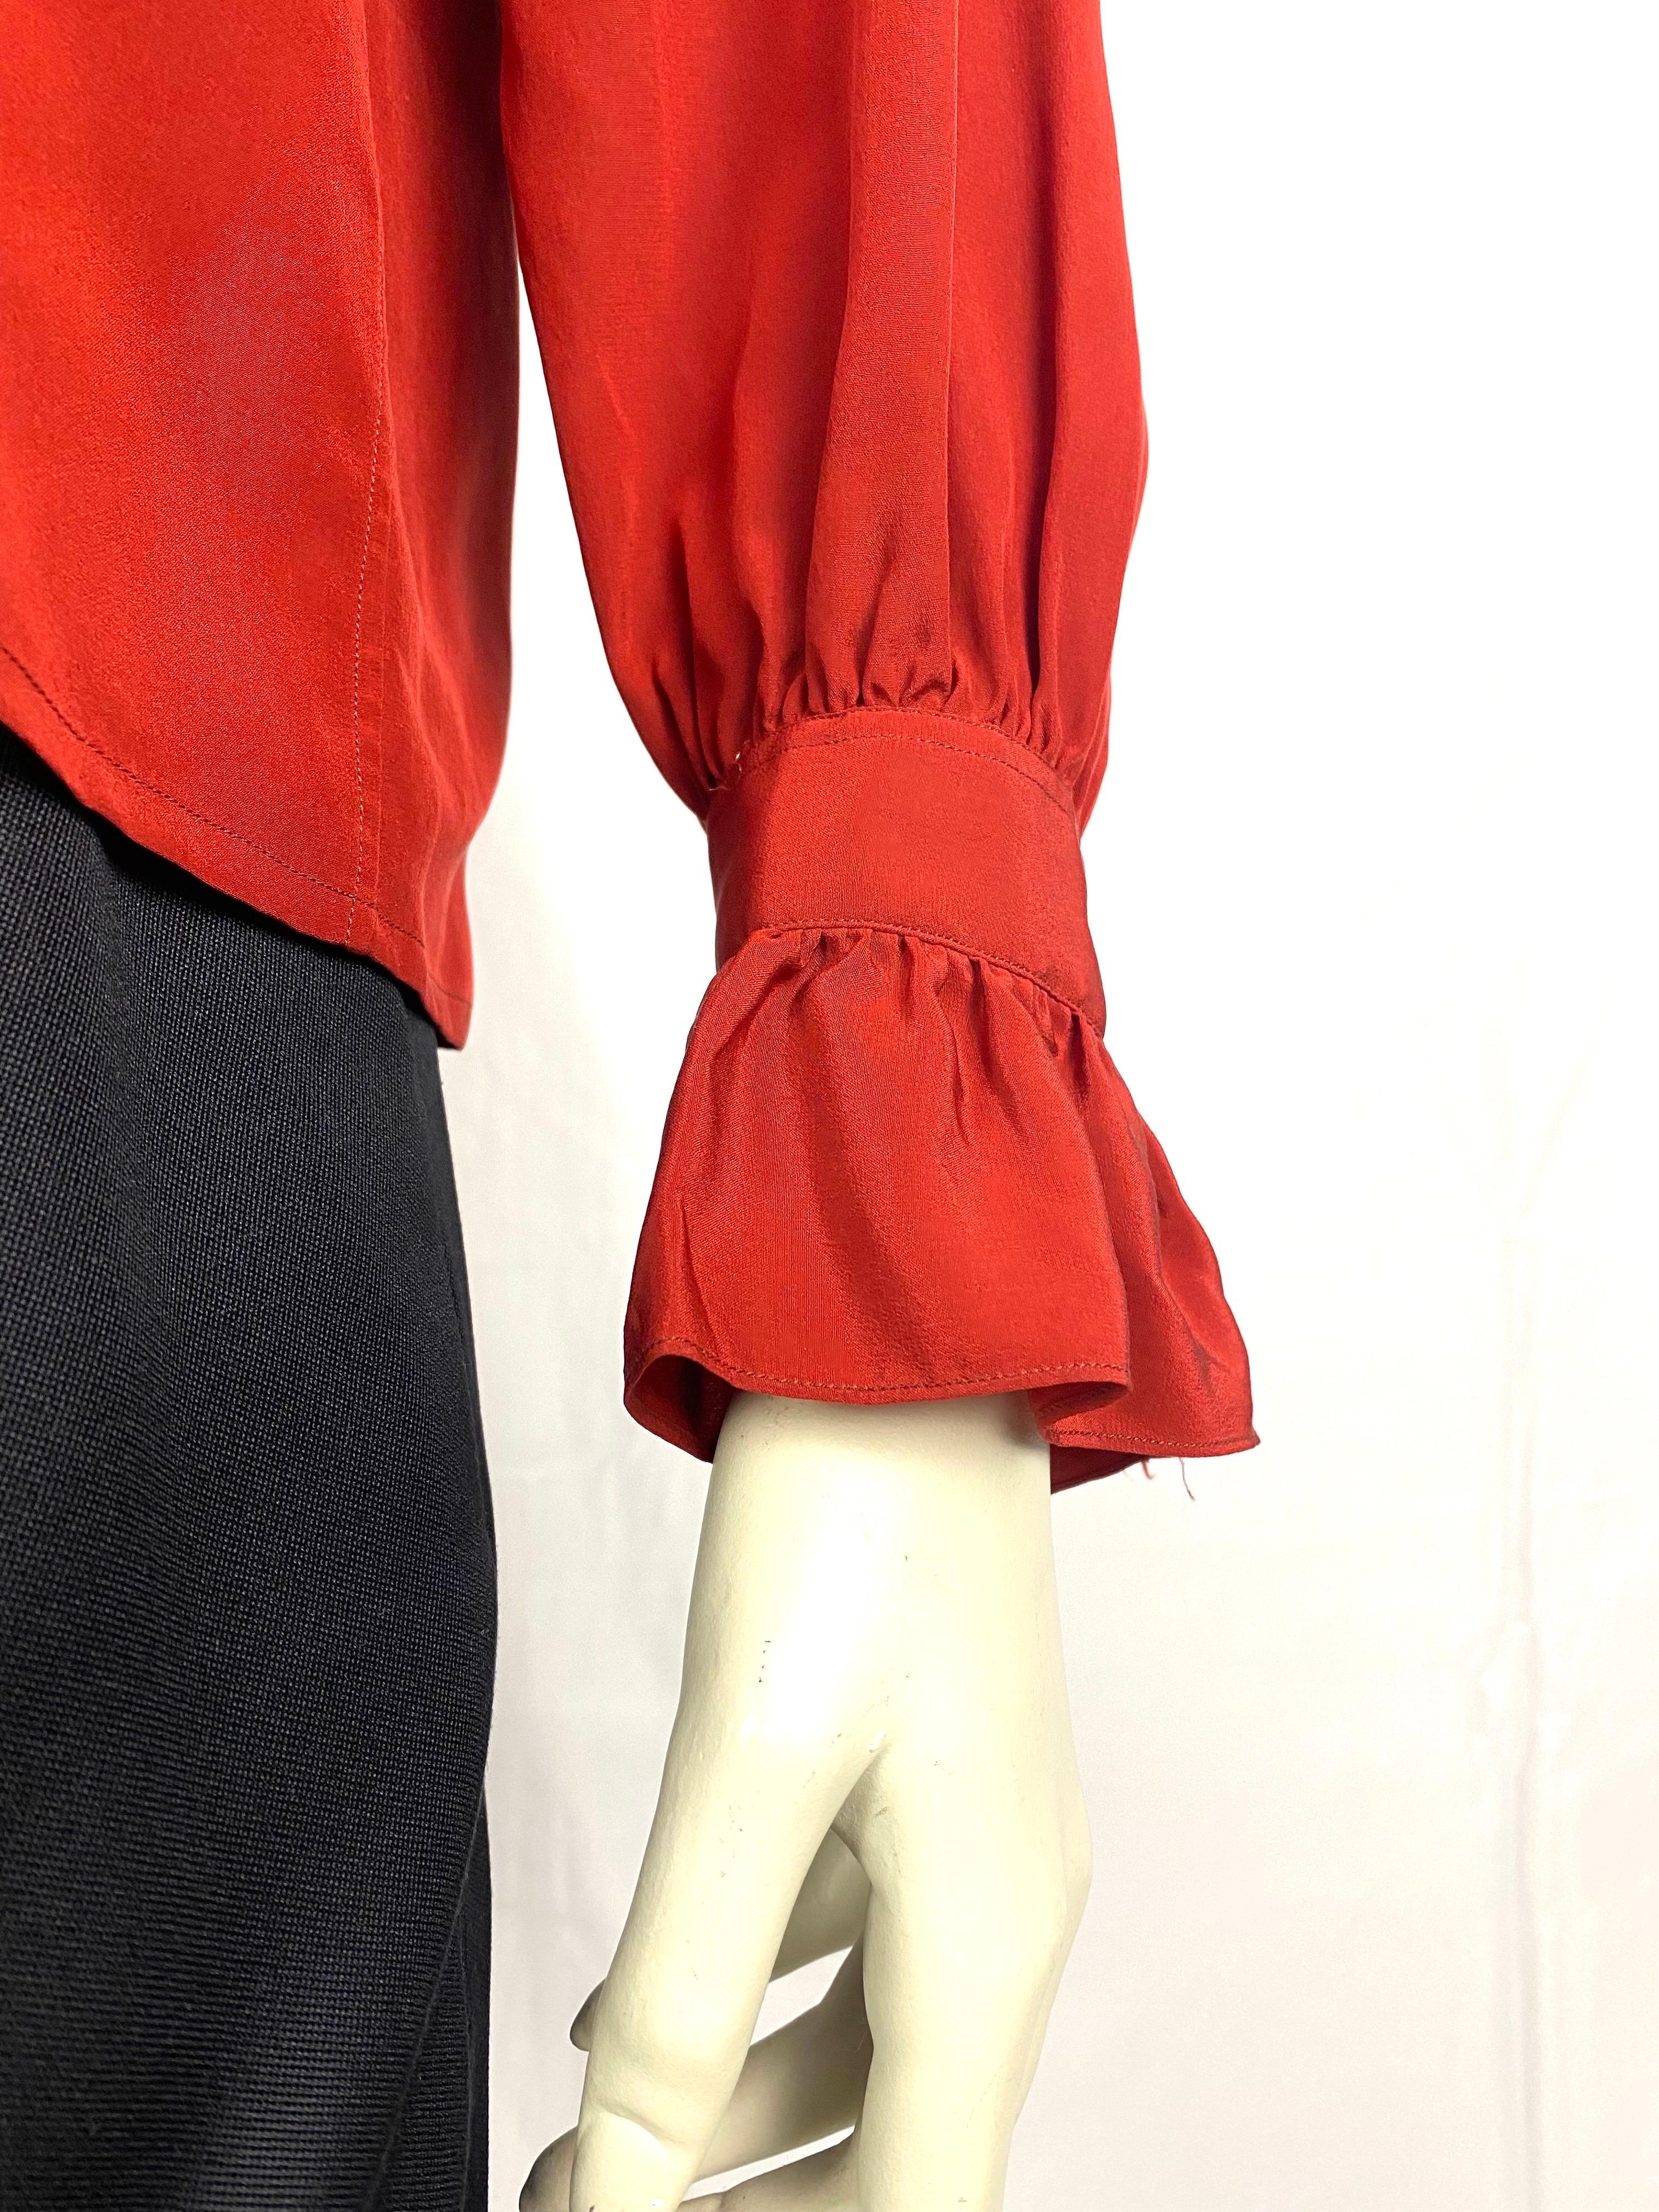 Women's Vintage Yves saint Laurent Rive Gauche blouse from 1970. Cardinal Red. For Sale